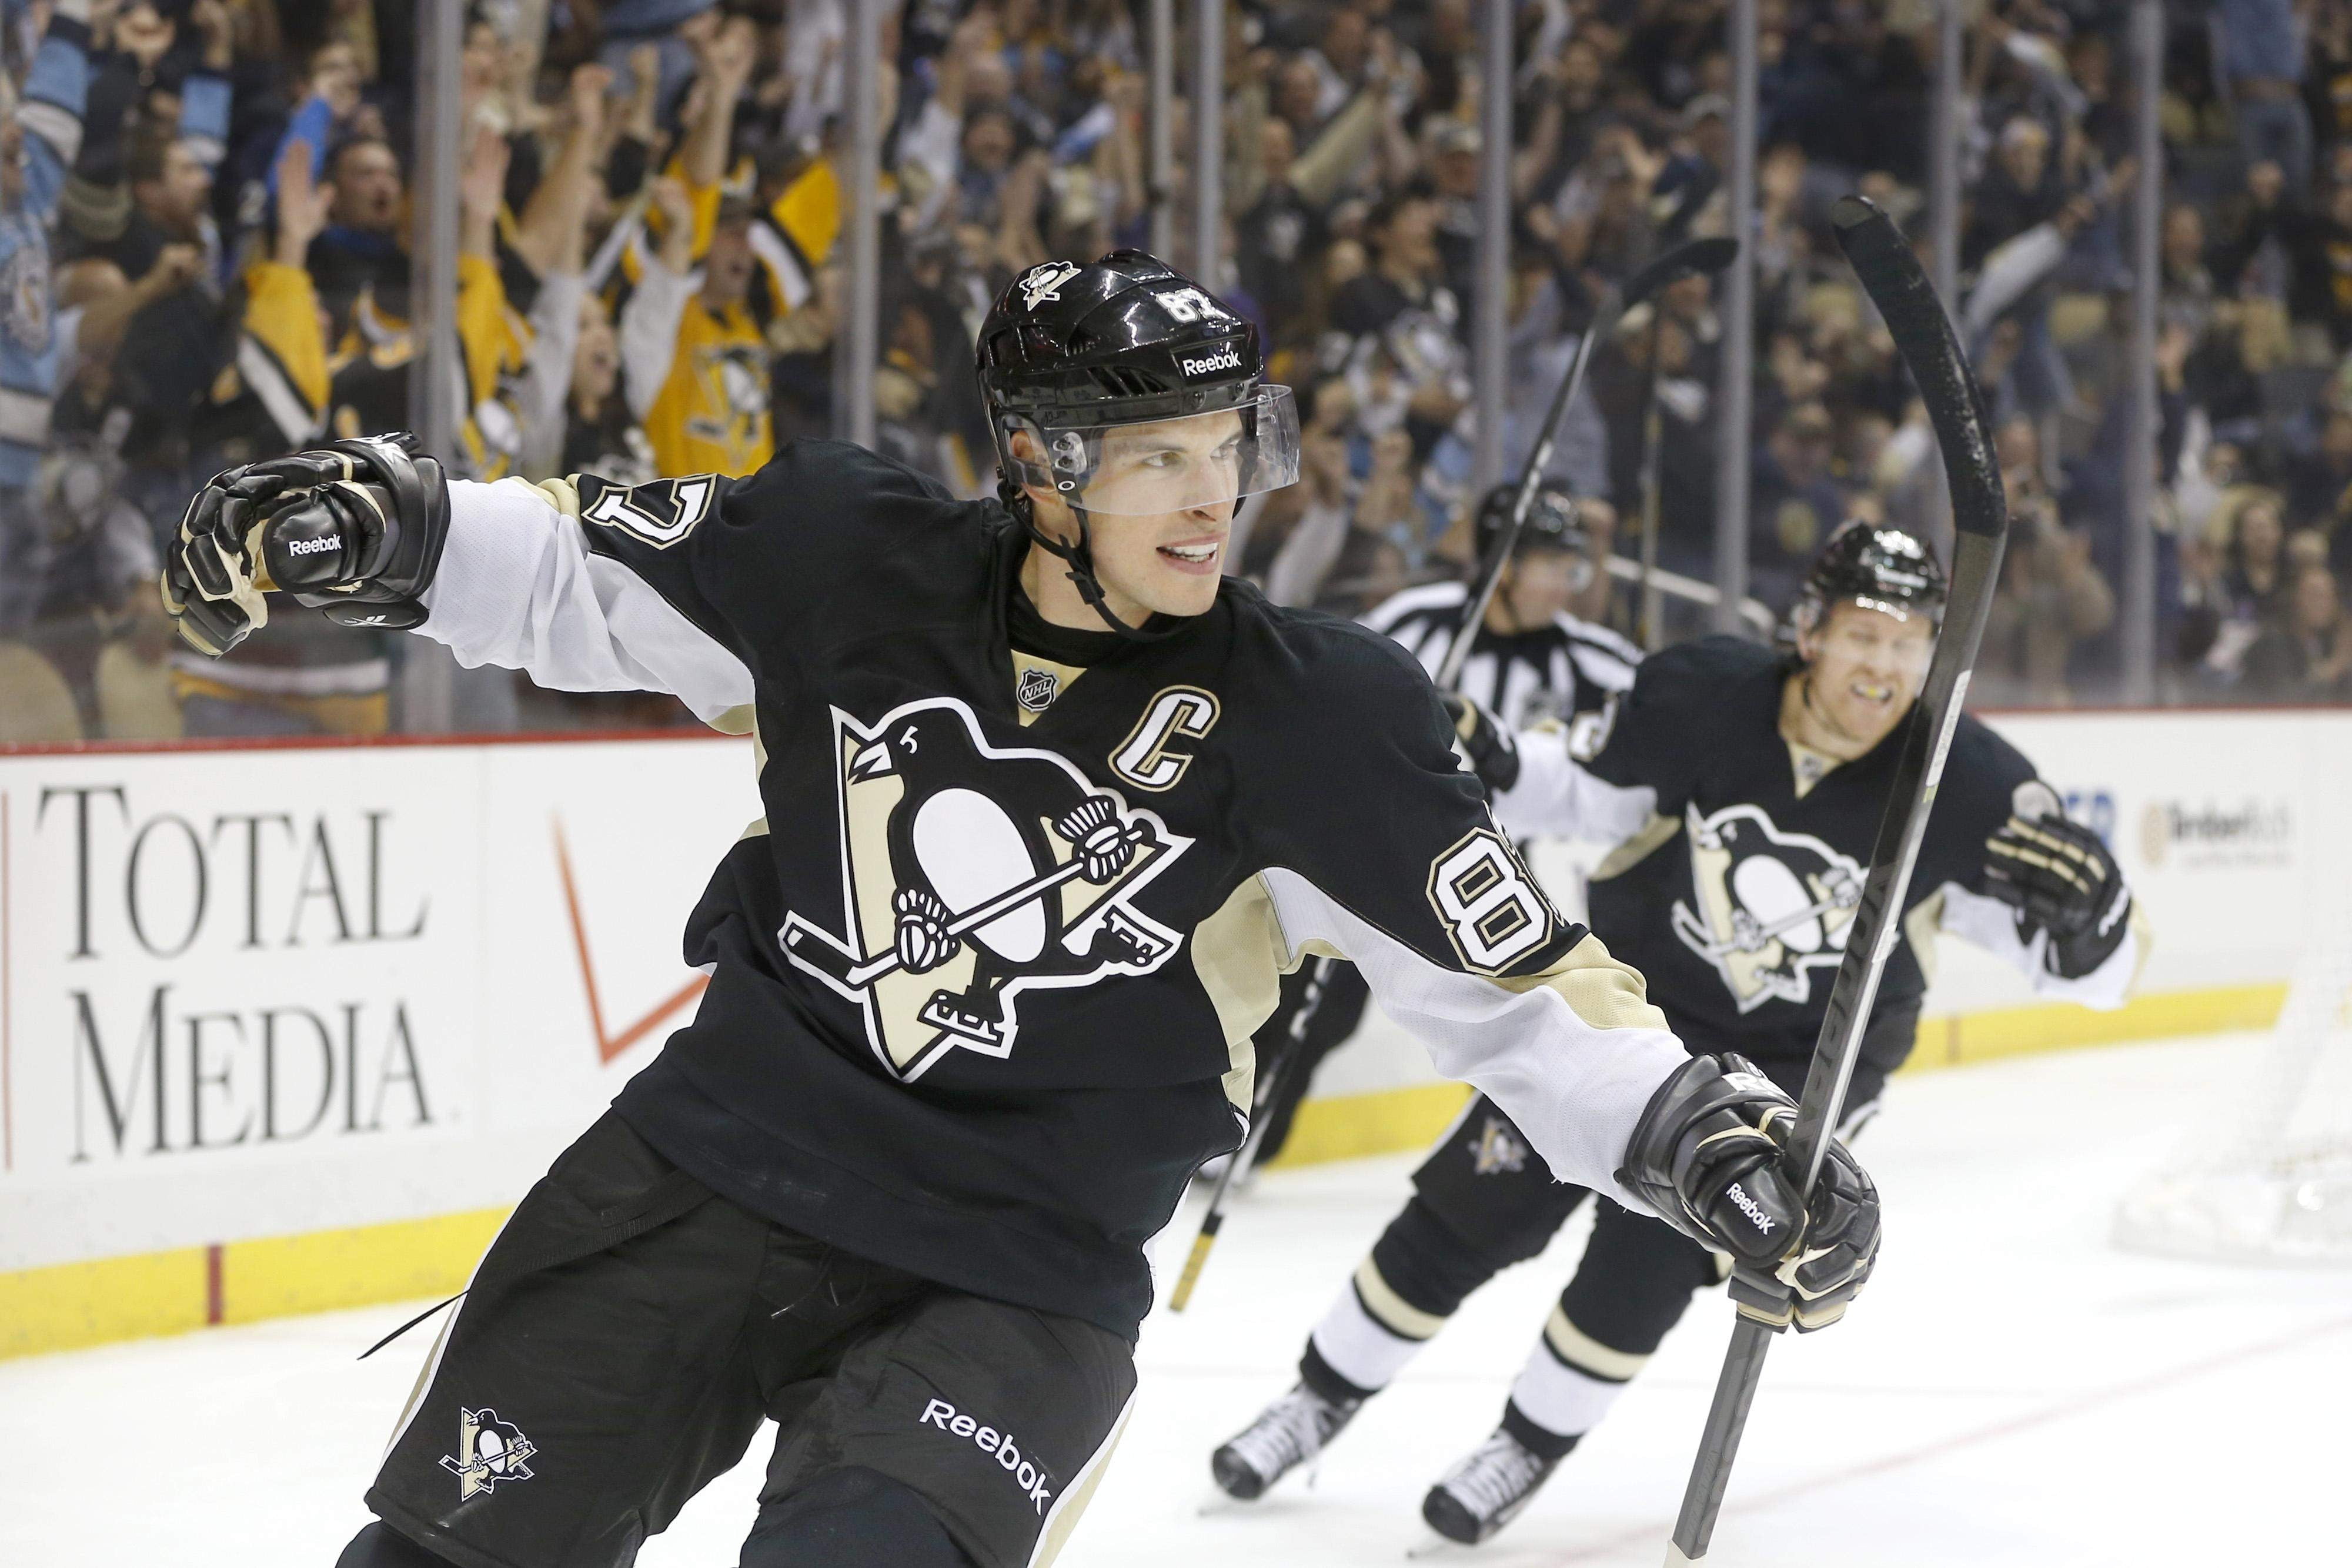 NHL, Sidney Crosby, sport, real people, security, clothing